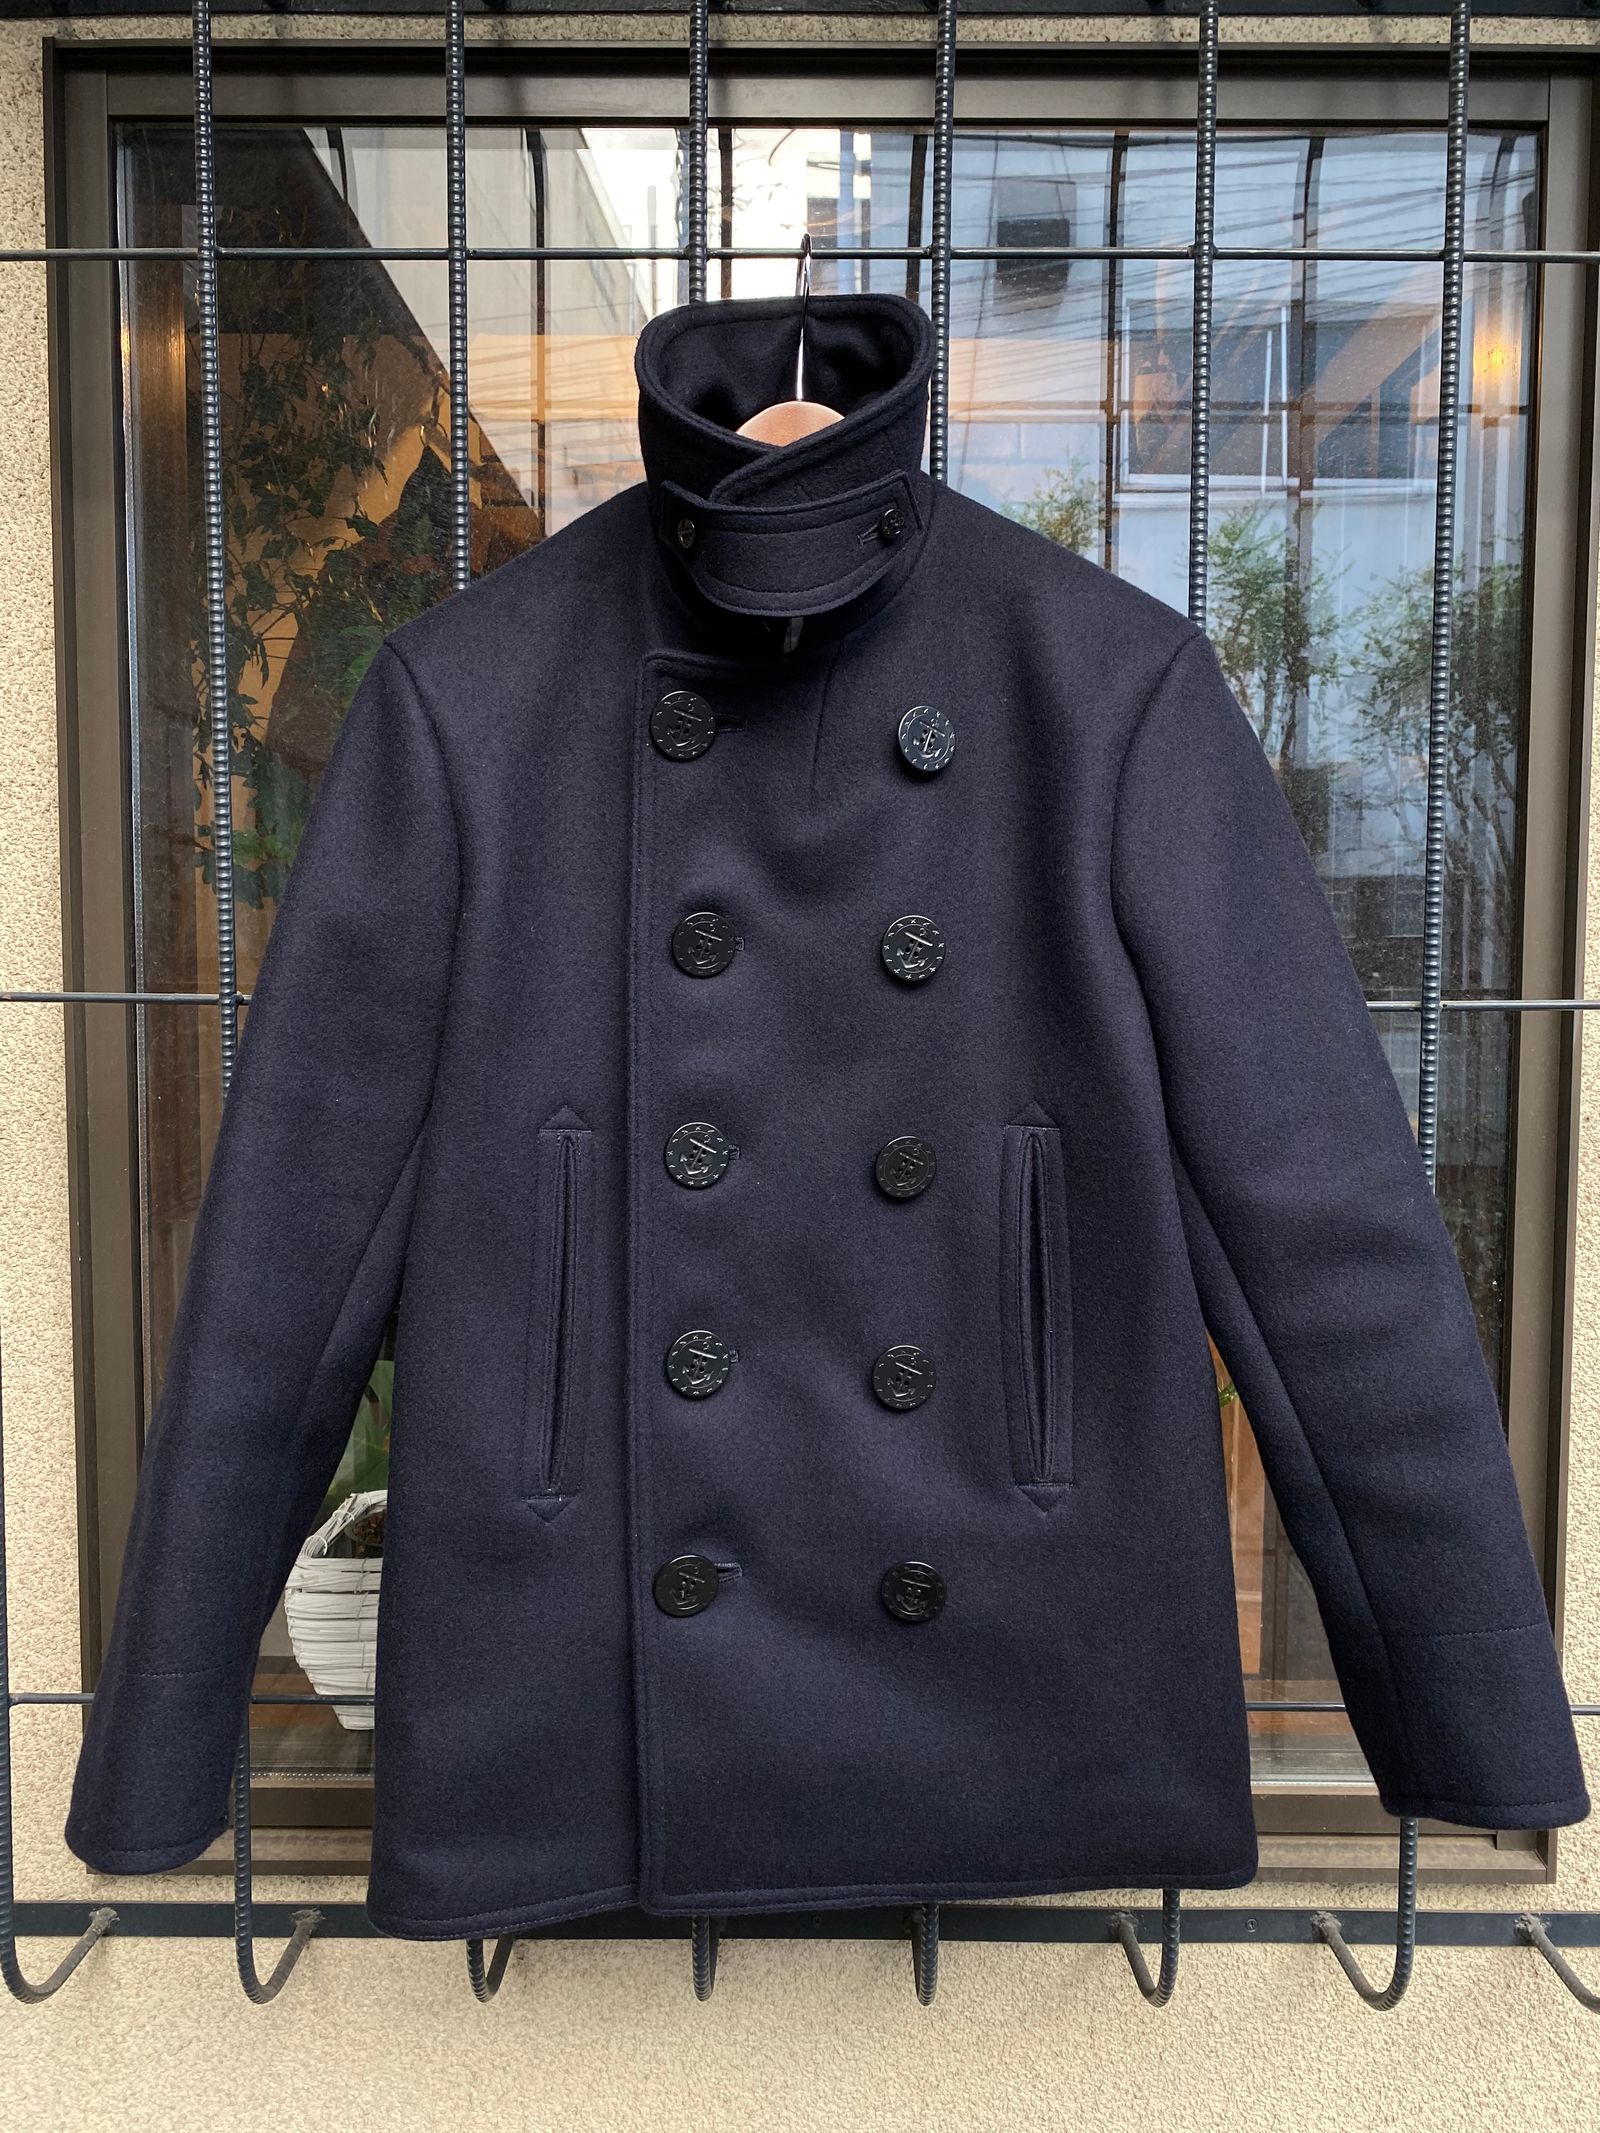 BR11554 / PEA-COAT “NAVAL CLOTHING FACTORY”